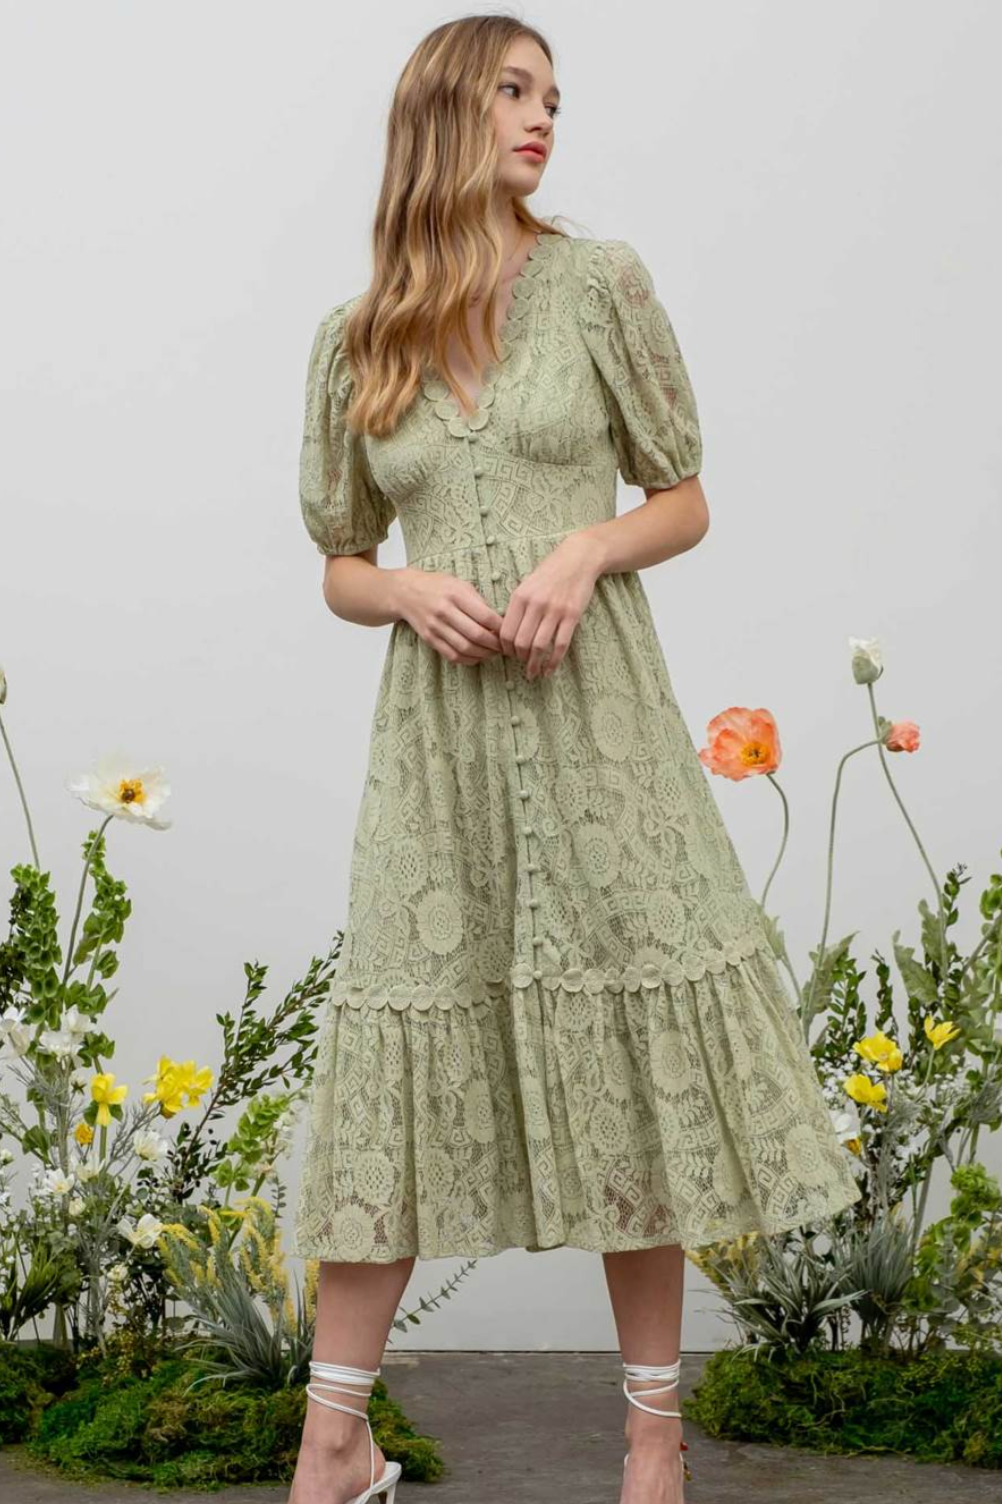 Button Down Lace Midi Dress in Light Sage - The Street Boutique 